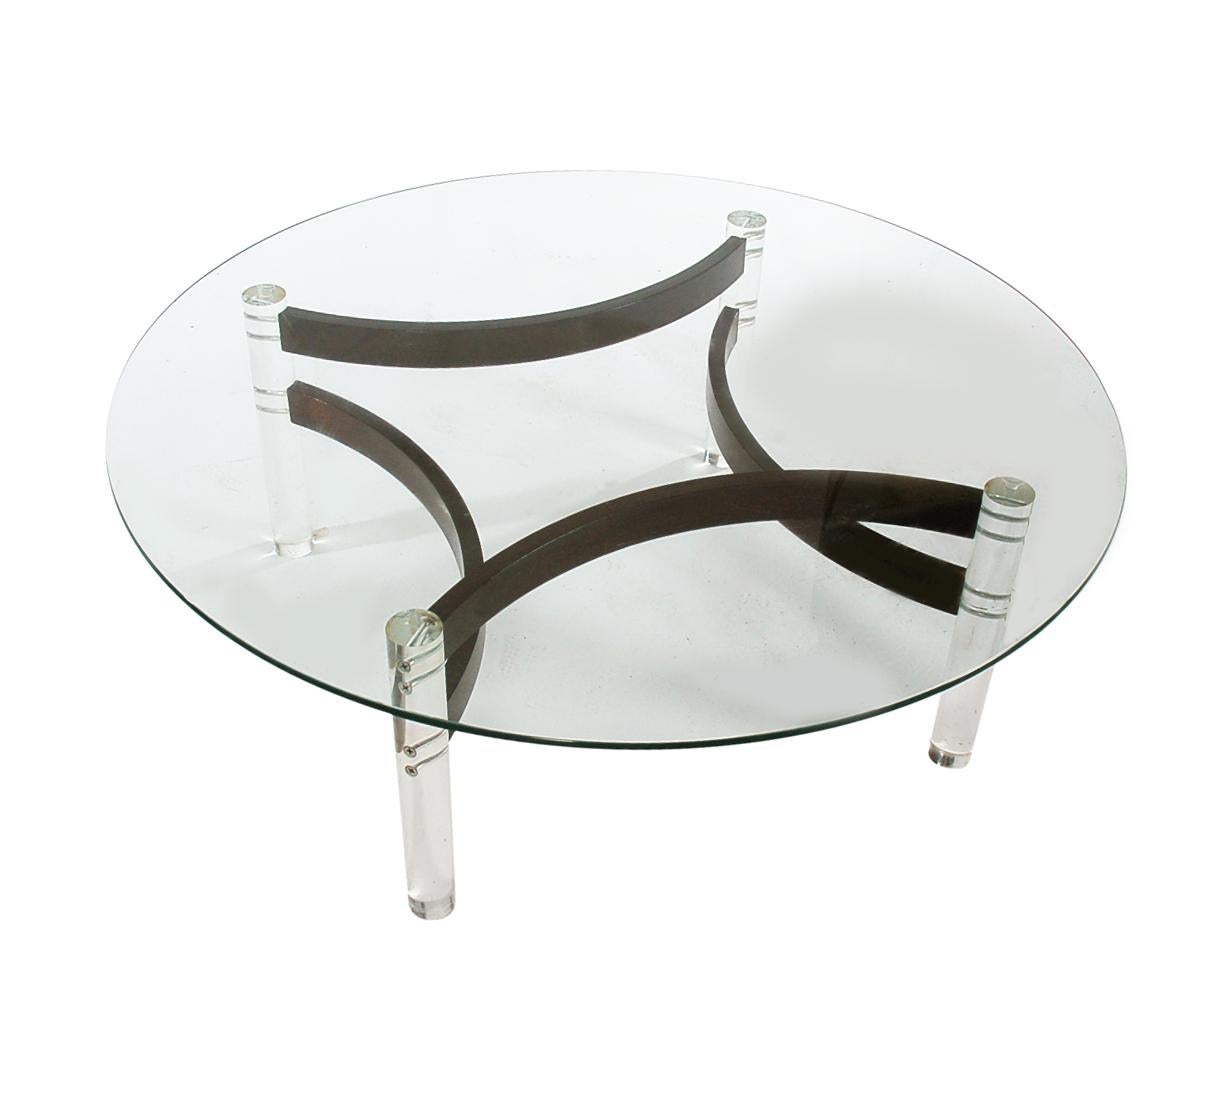 An incredible vintage coffee table circa 1970s. This table features thick solid acrylic legs, bentwood stretchers, and thick clear glass top. Very well cared for through the years.